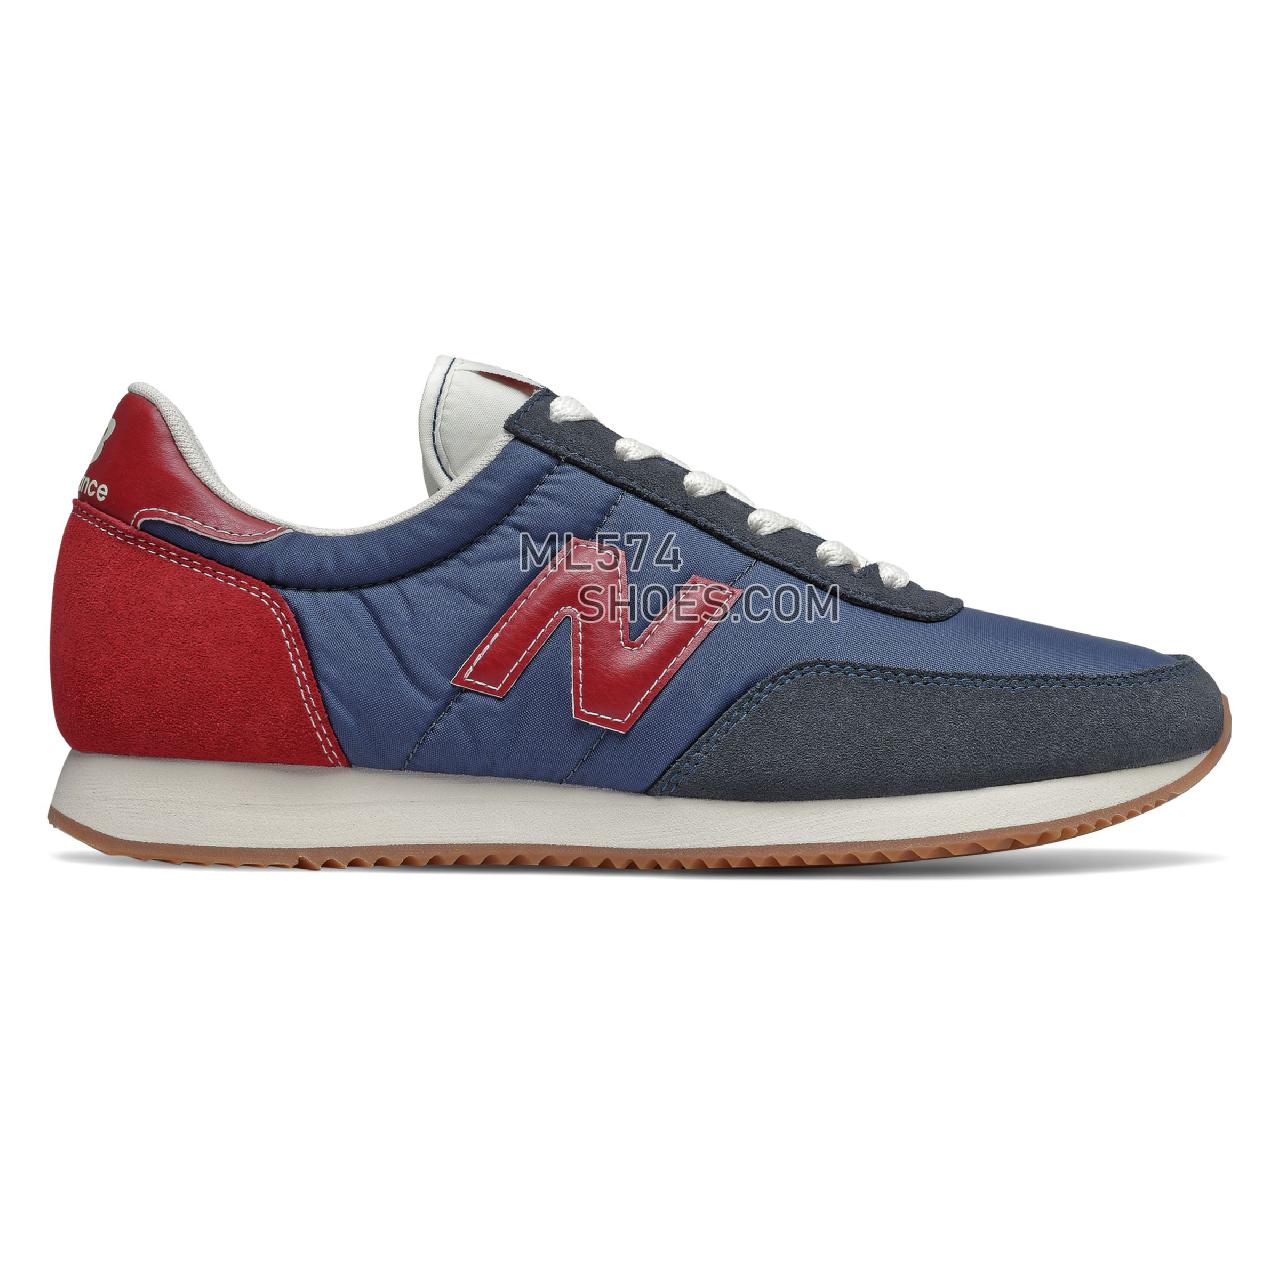 New Balance Unisex 720 - Men's 720 Classic - Moroccan Tile with NB Scarlet - UL720ZD